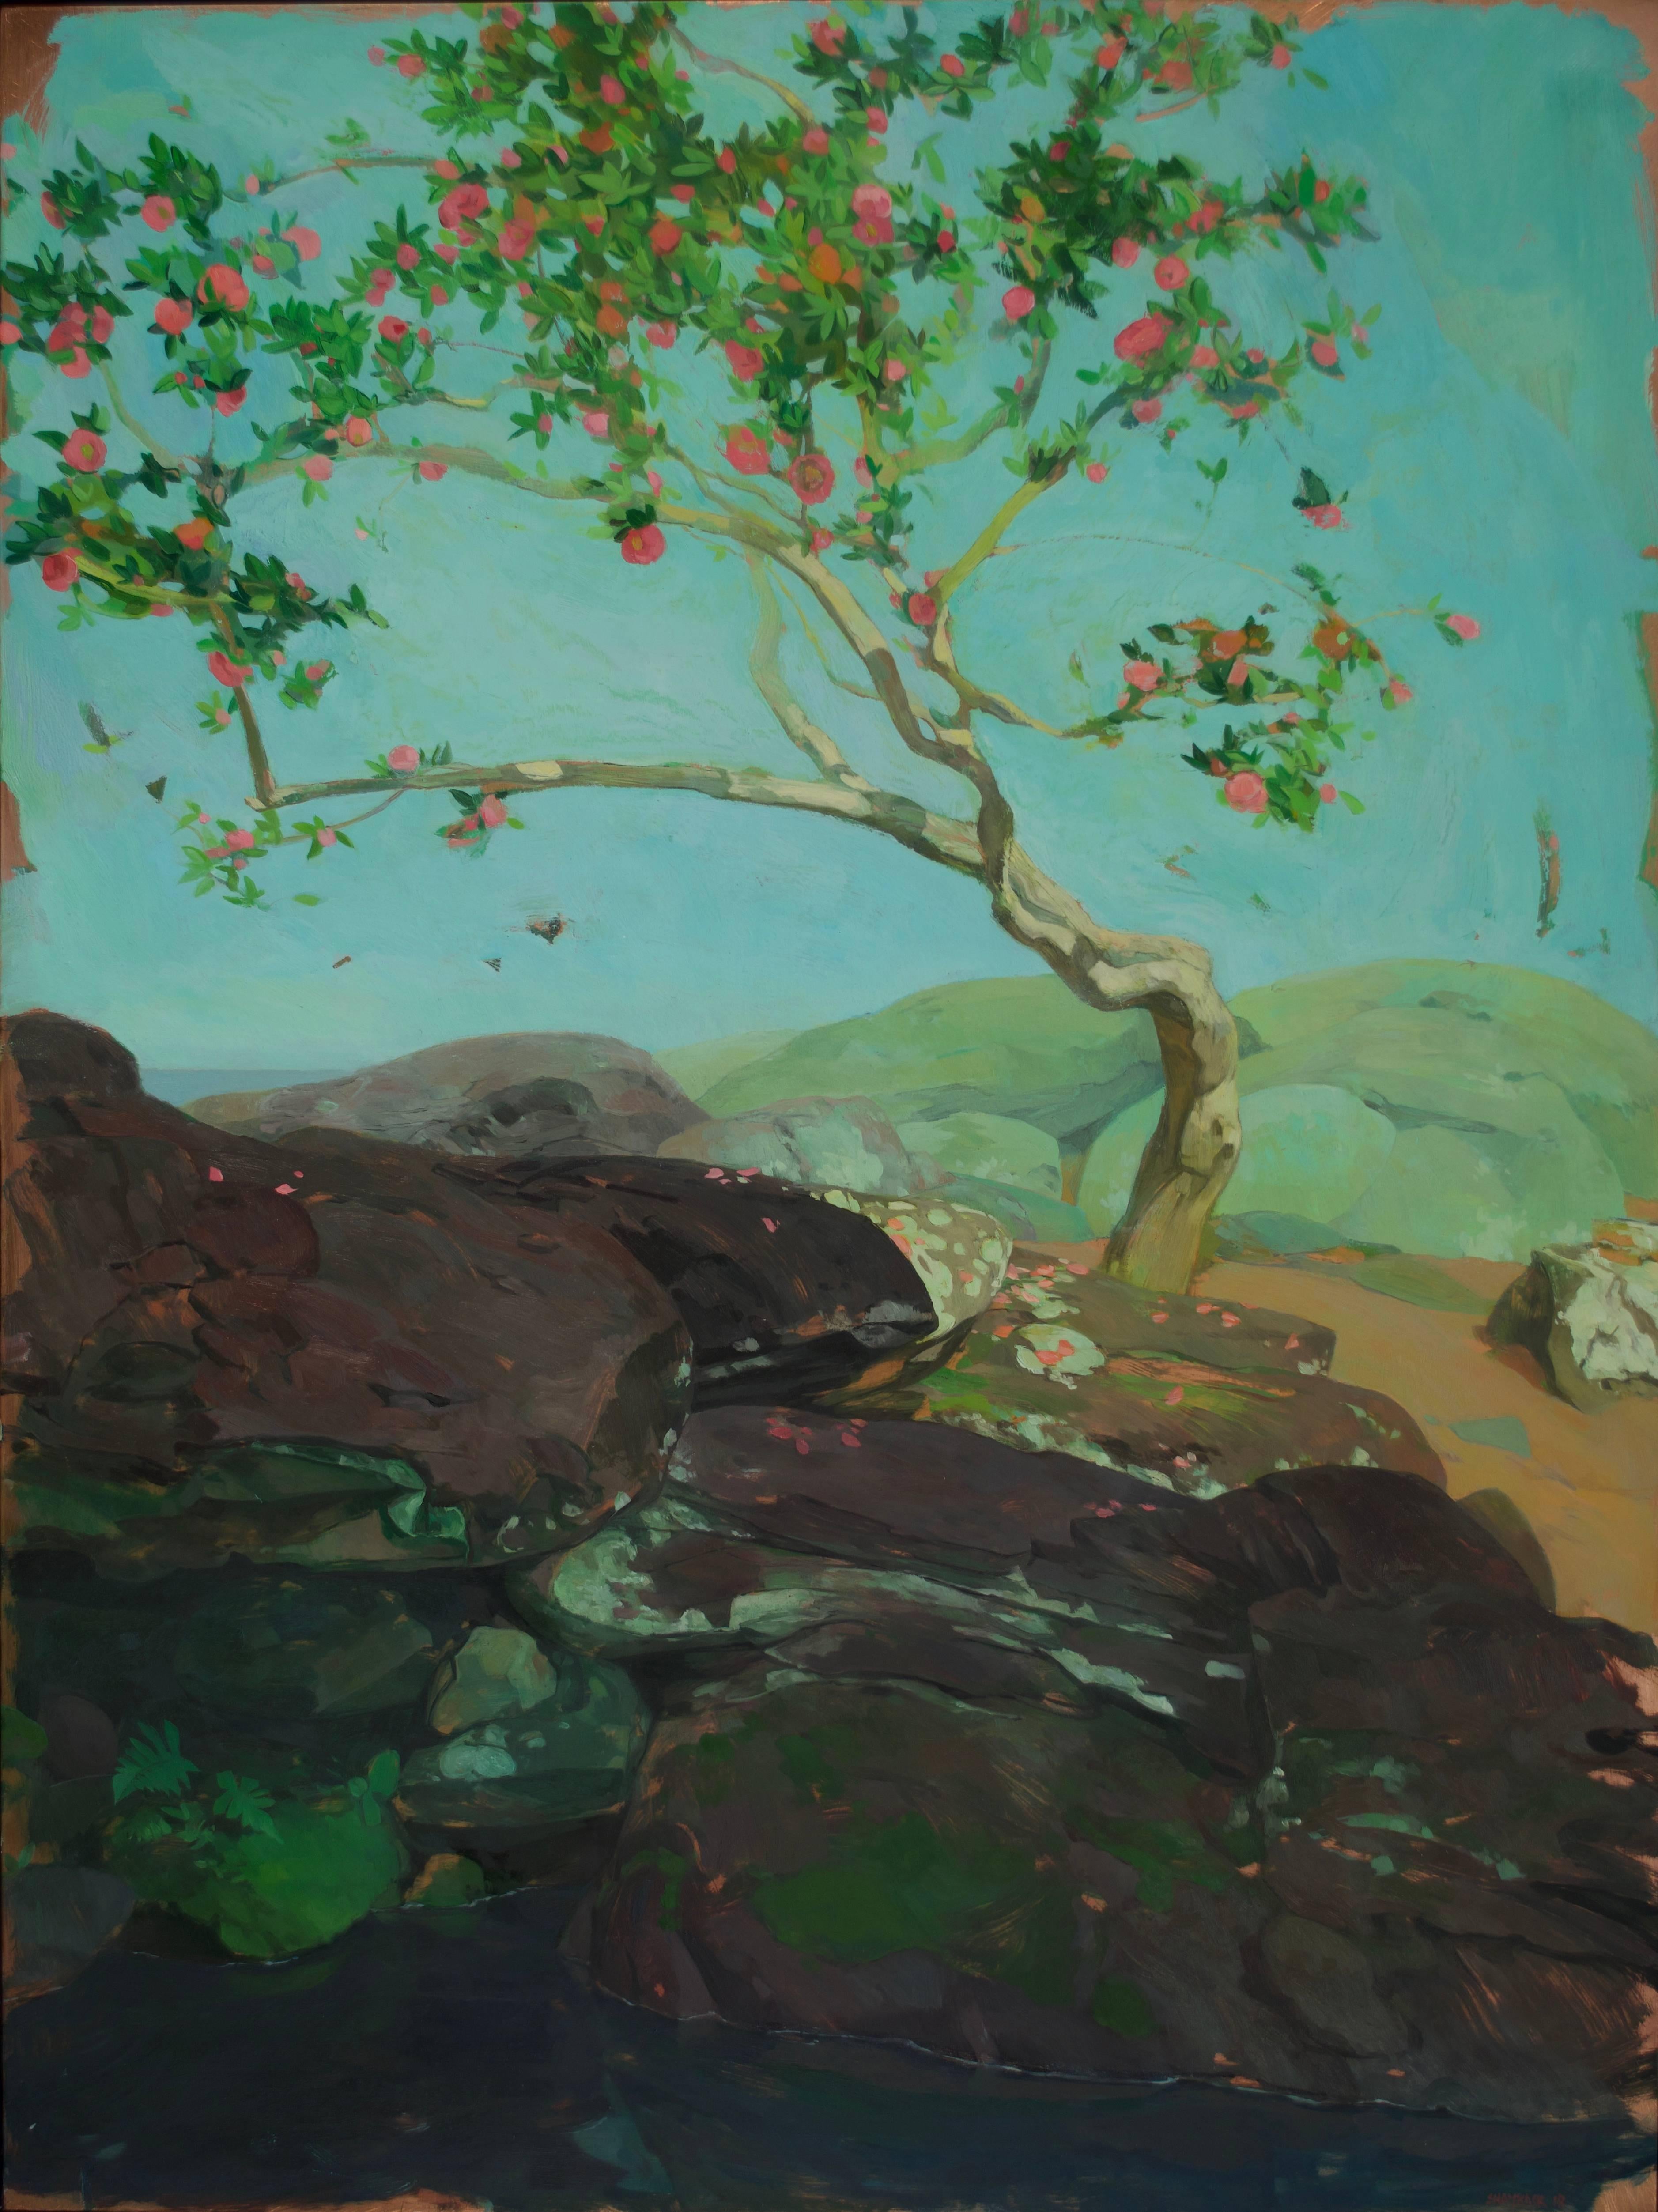 "Camellia Tree by Pool" is an original oil on copper by artist Benjamin Shamback. The painting shows Camellia Tree over a shady pool at Bellingrath Gardens in Alabama. The work was painted in Plein Air.  The painting is mostly shades of the blue